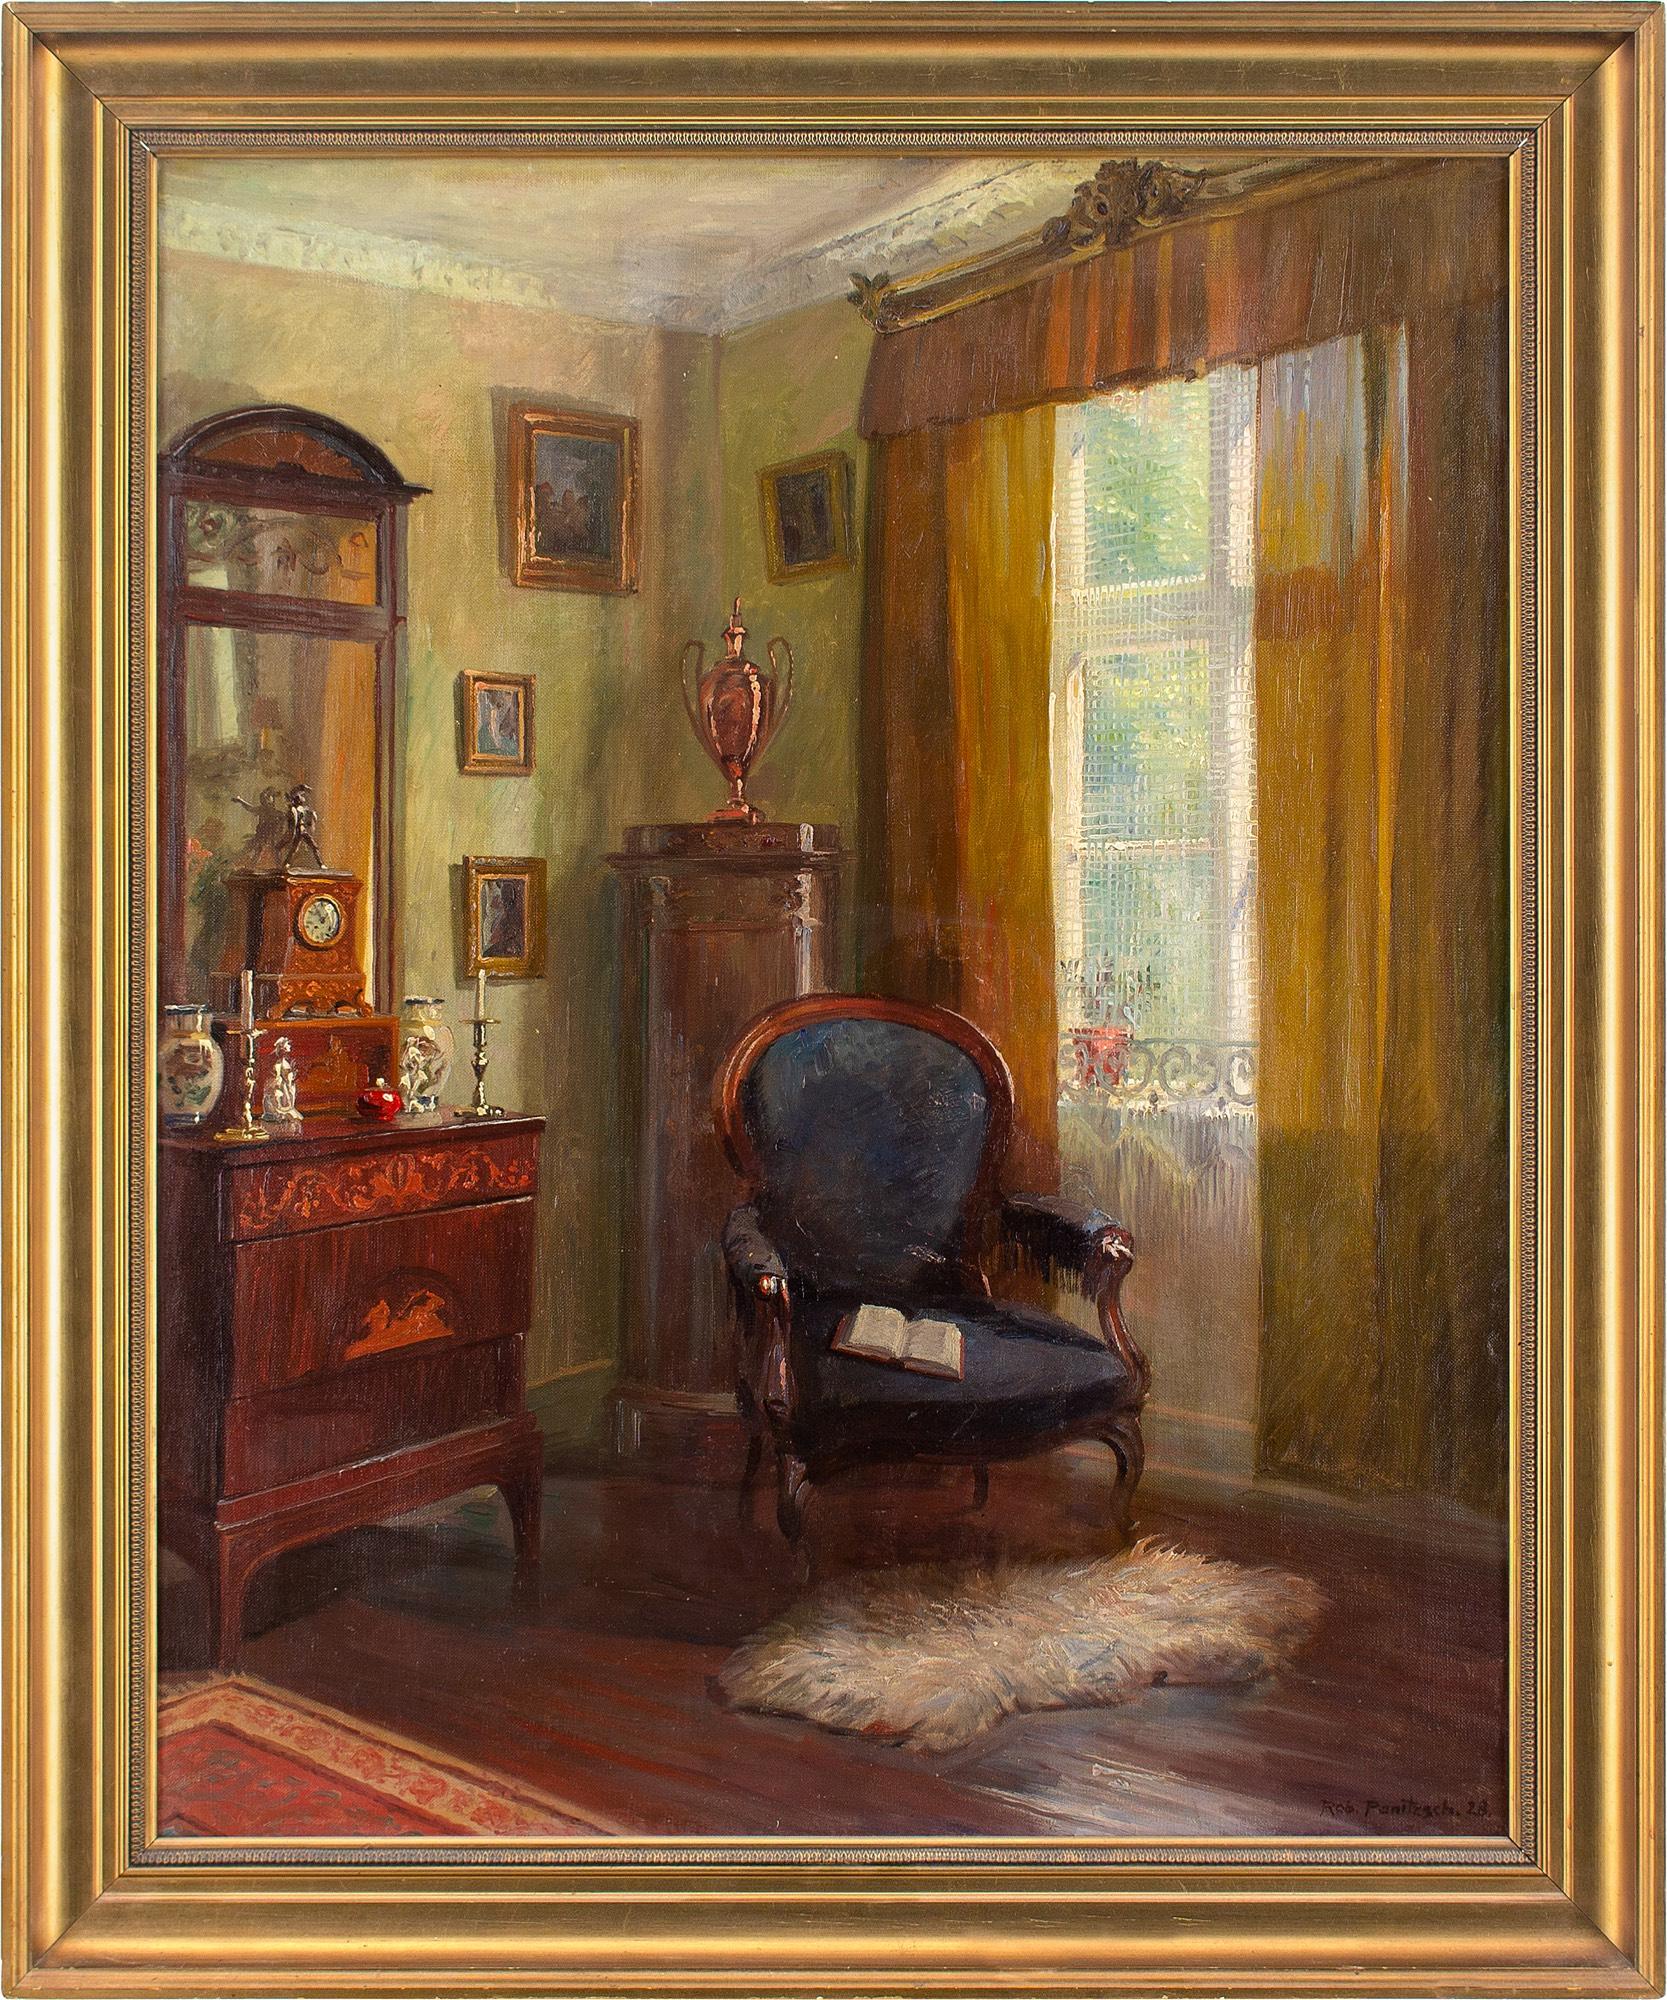 This early 20th-century oil painting by Danish artist Robert Panitzsch (1879-1949) depicts an interior with an armchair, window, and various furnishings.

Panitzsch has become widely admired for his beautiful interior scenes, often depicting the